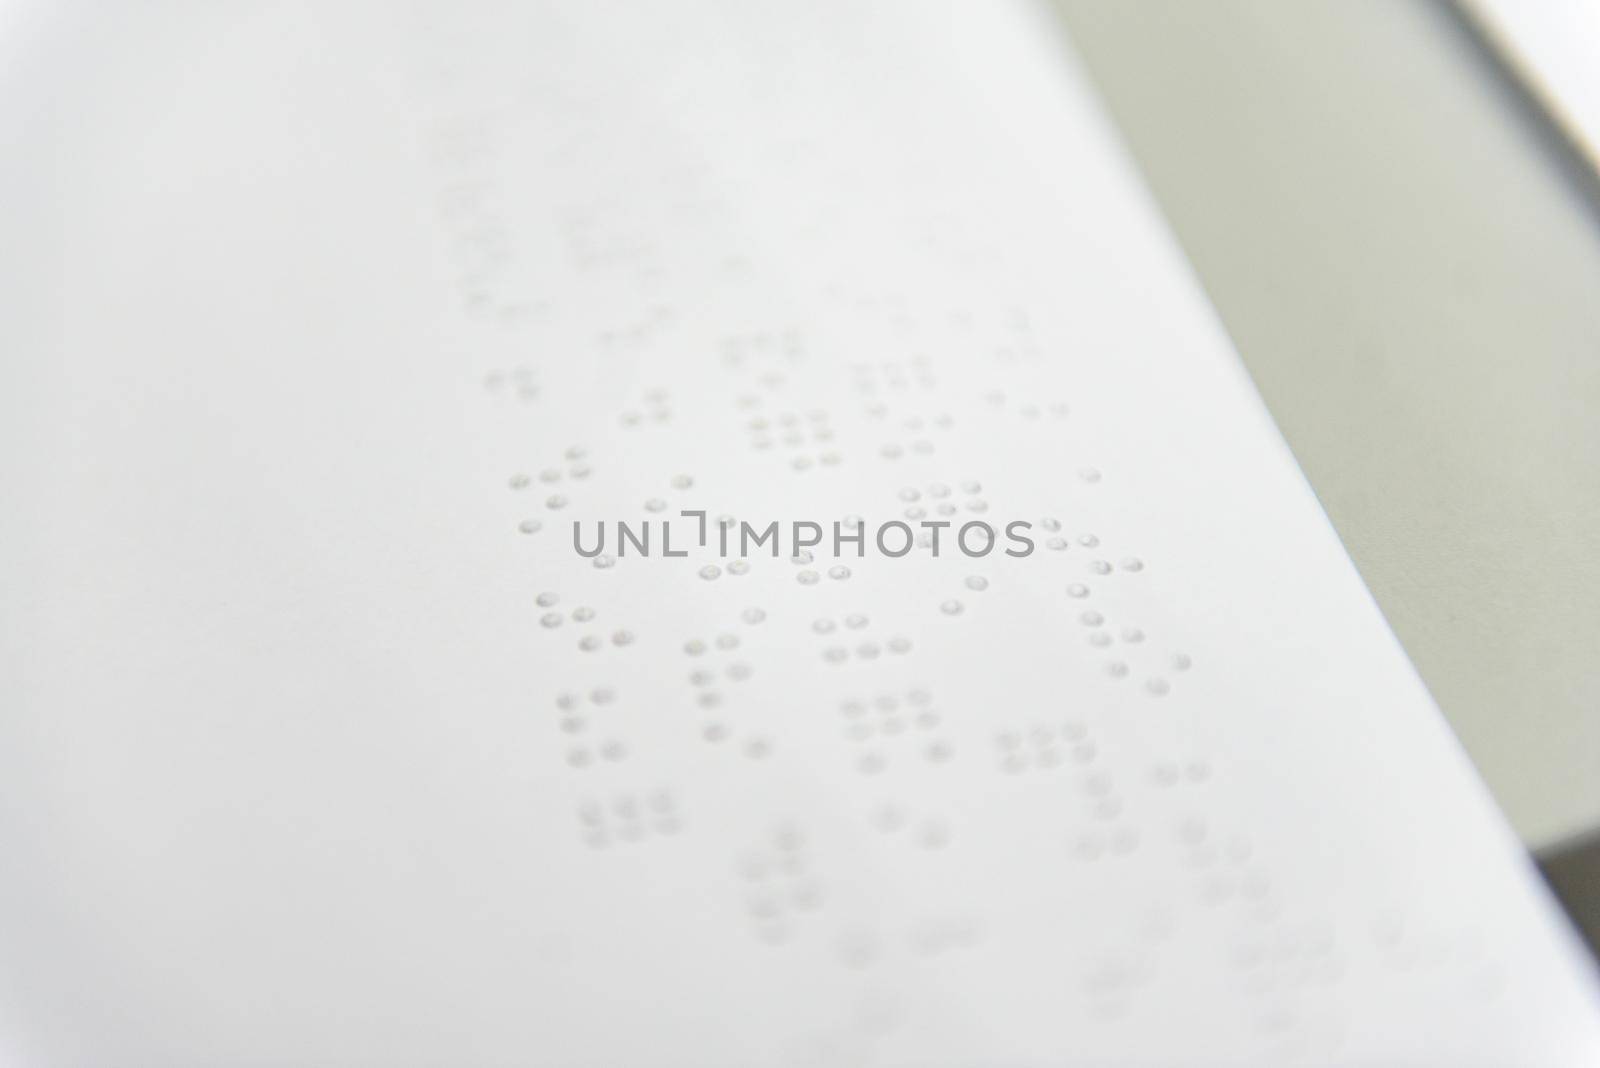 A fragment of text in Louis Braille printed on a standard sheet of paper using special printing equipment.